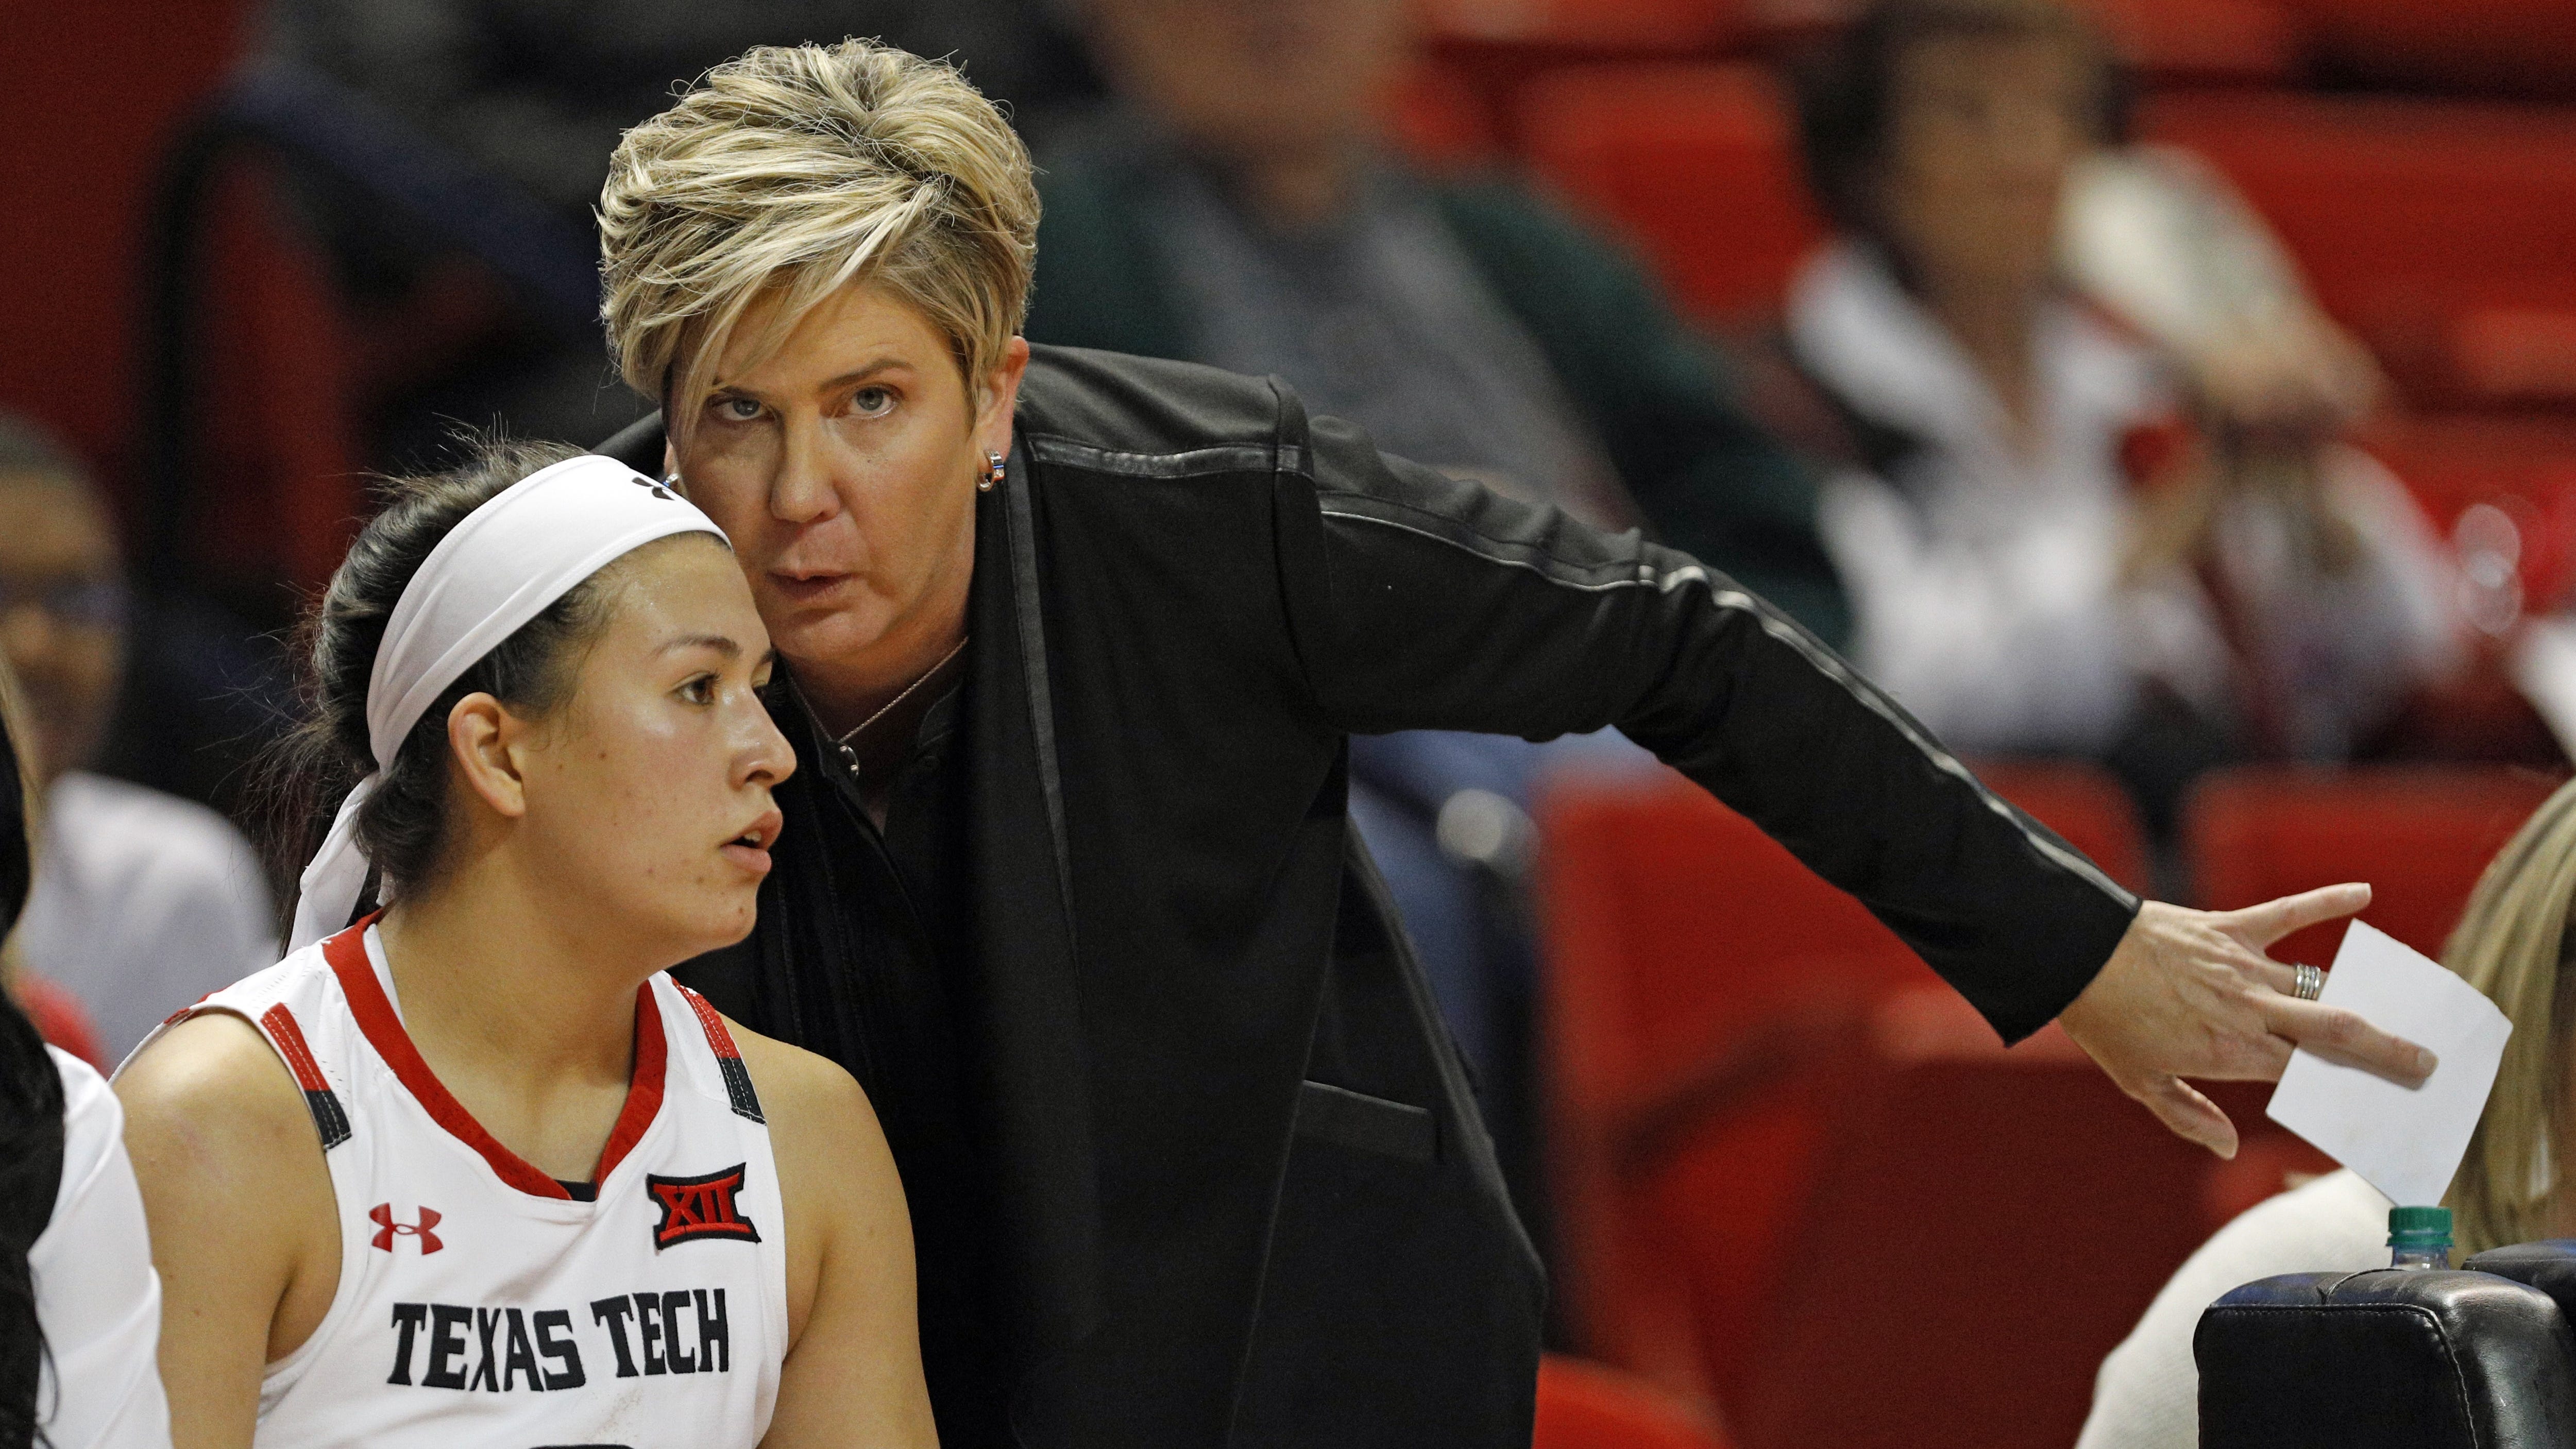 Marlene Stollings' Texas Tech program a culture of abuse, players say